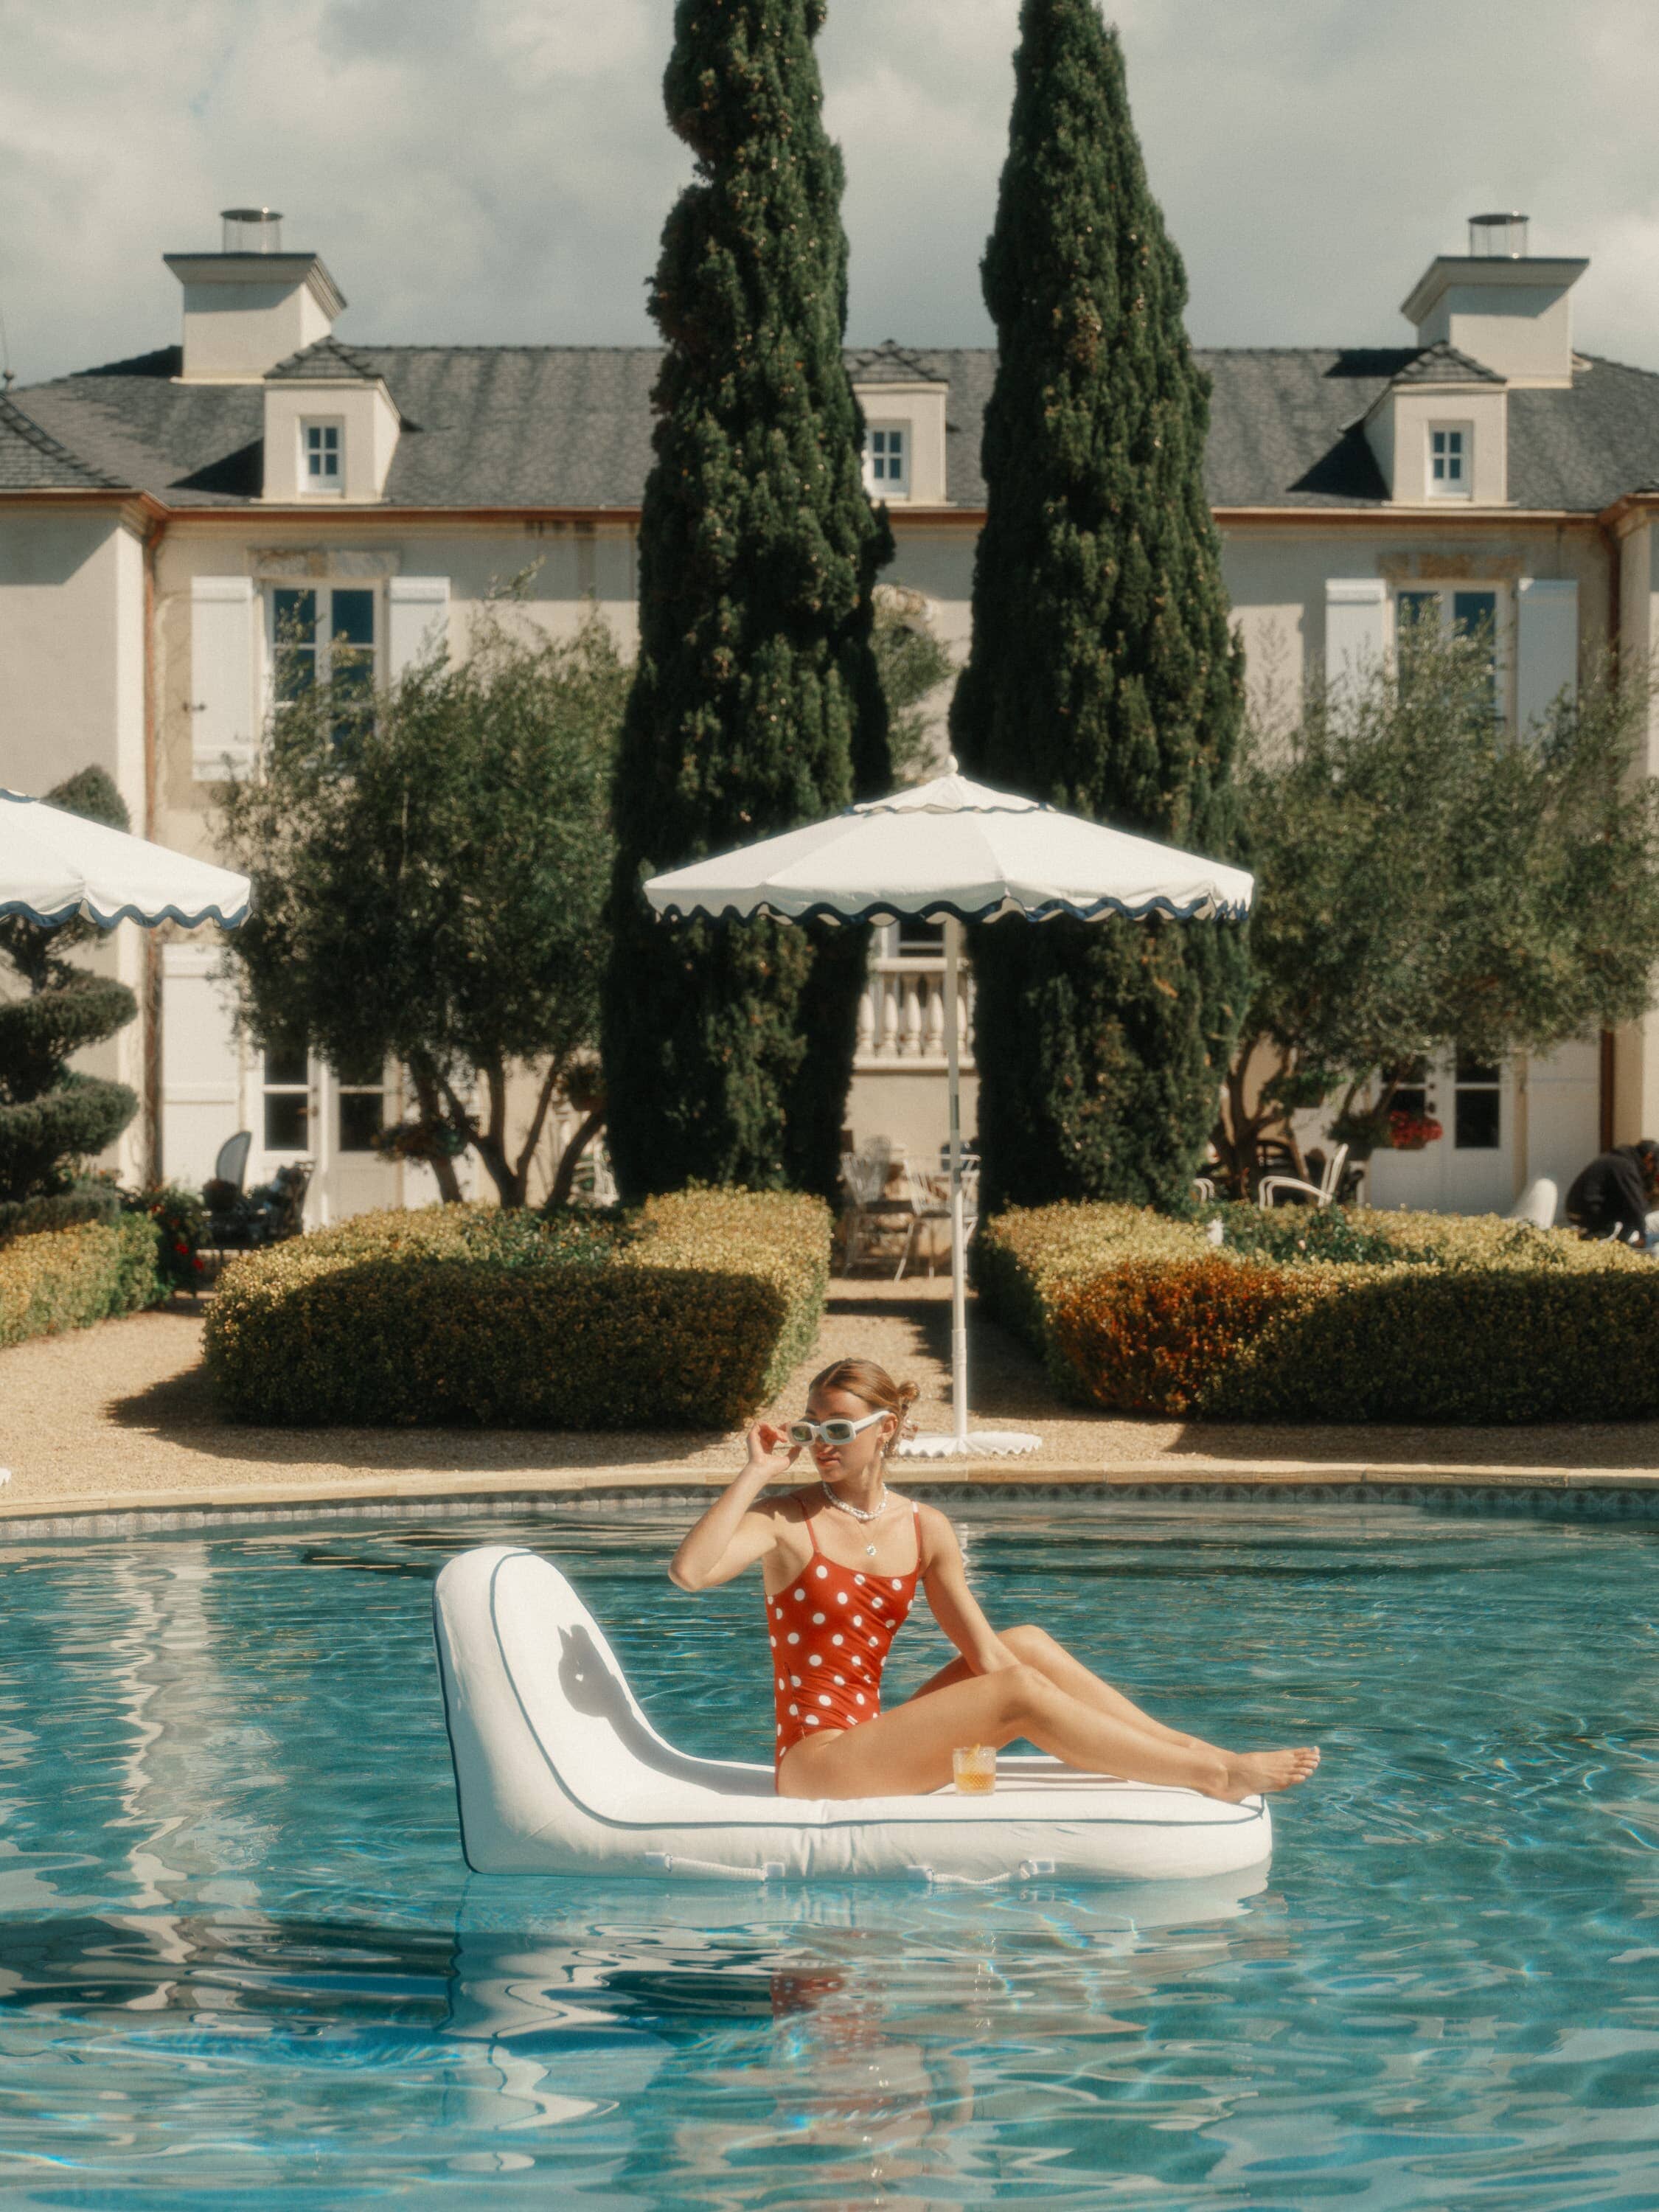 Woman on pool lounger in a pool